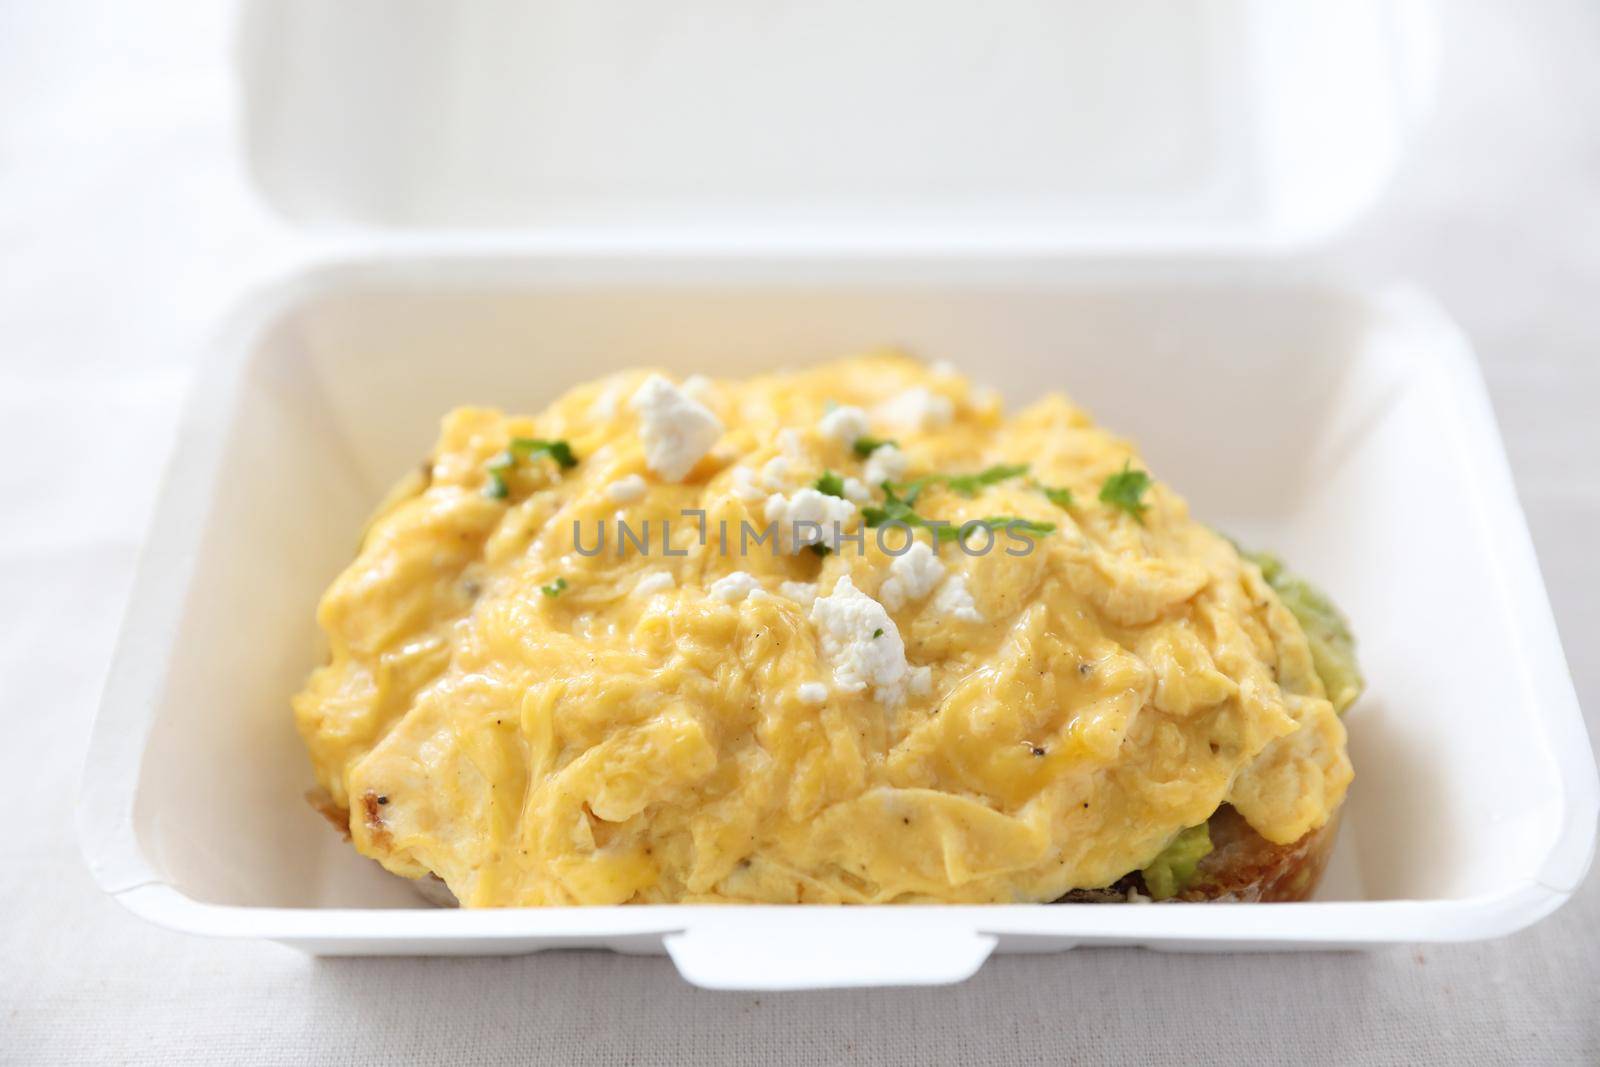 Avocado and scrambled eggs toast with delivery package in white background by piyato